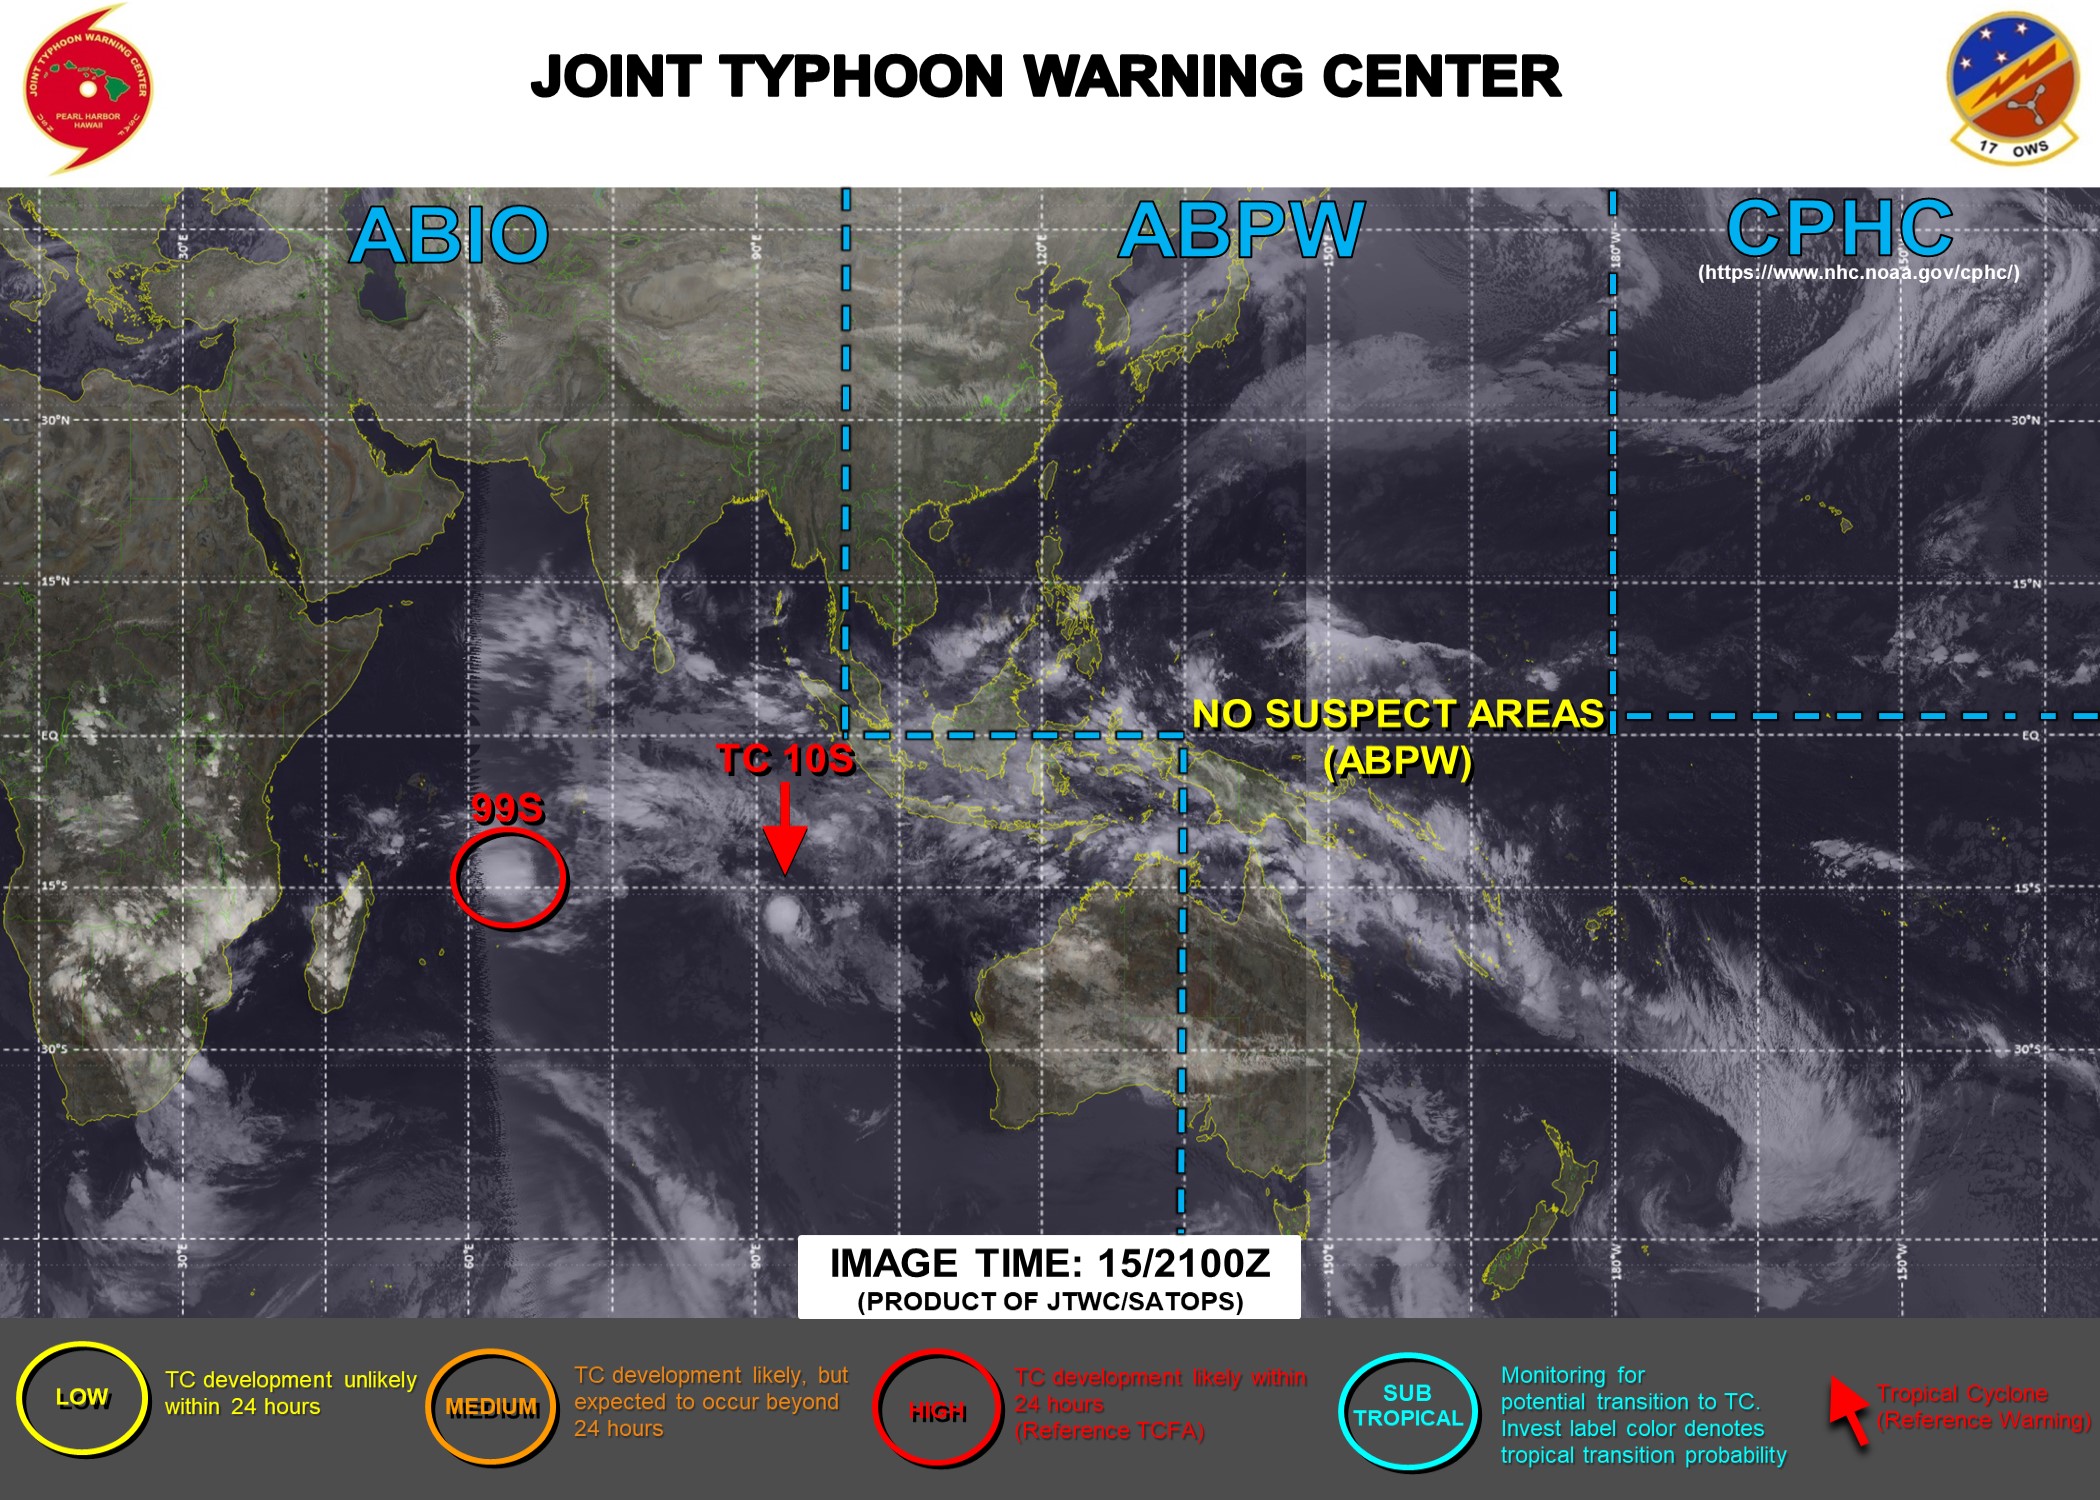 THE JTWC IS ISSUING 12HOURLY WARNINGS FOR TC 10S AND 3HOURLY SATELLITE BULLETINS FOR BOTH TC 10S AND INVEST 99S.